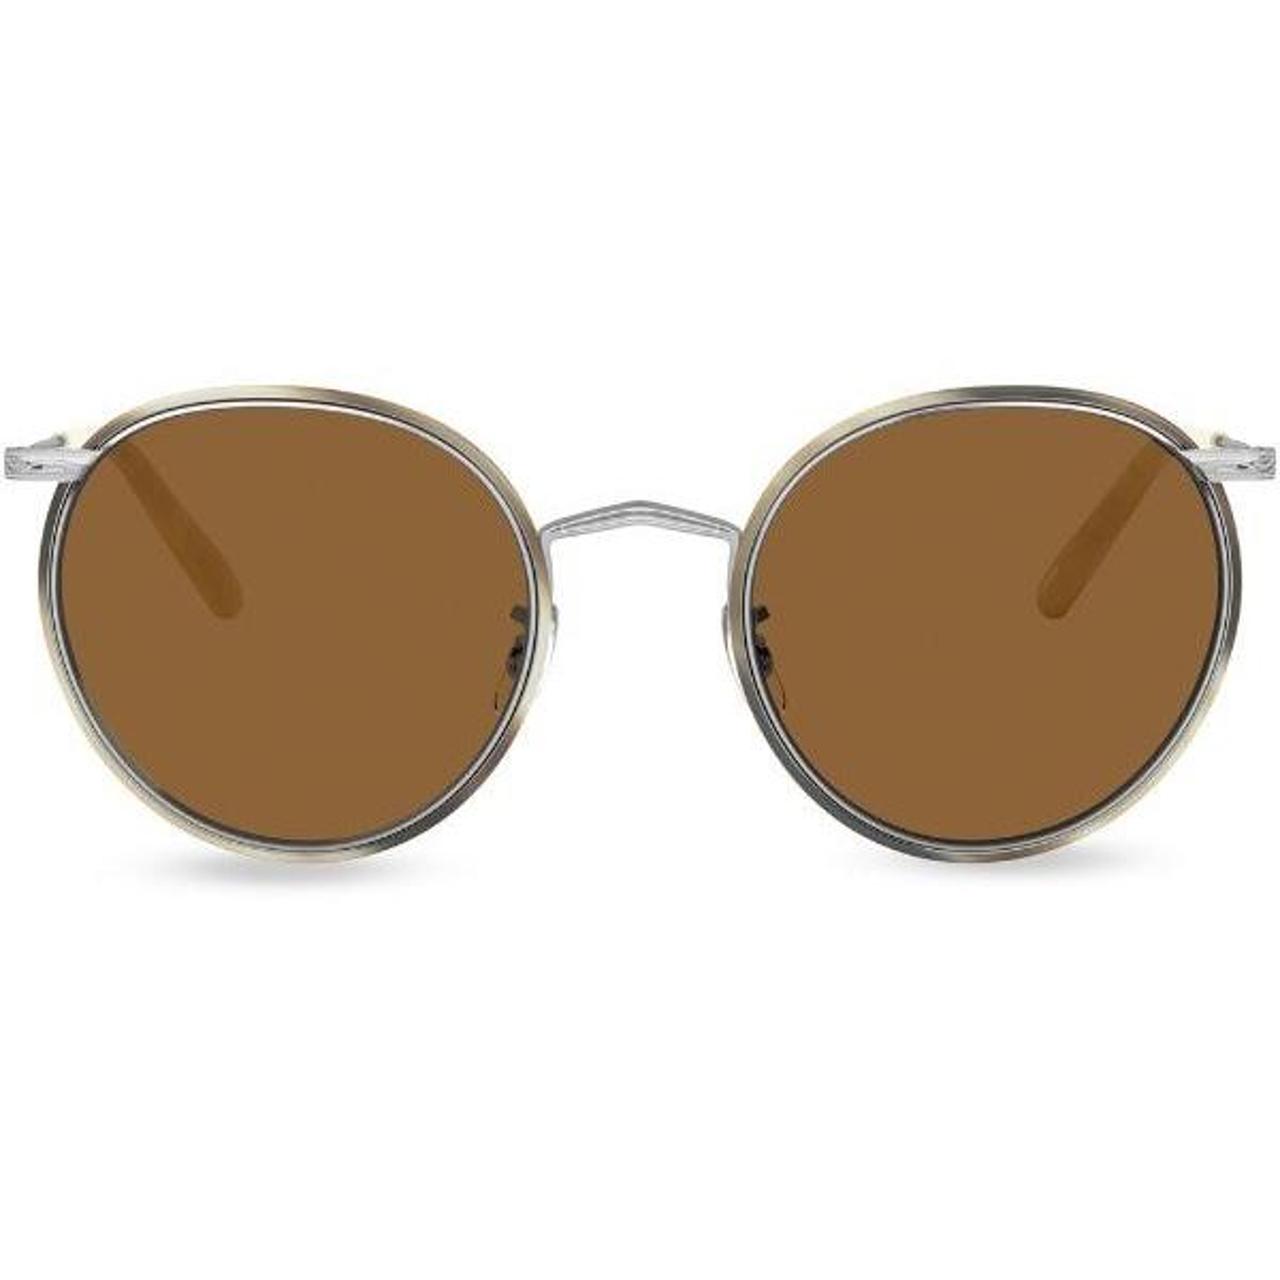 Oliver Peoples Women's Tan and Brown Sunglasses (4)